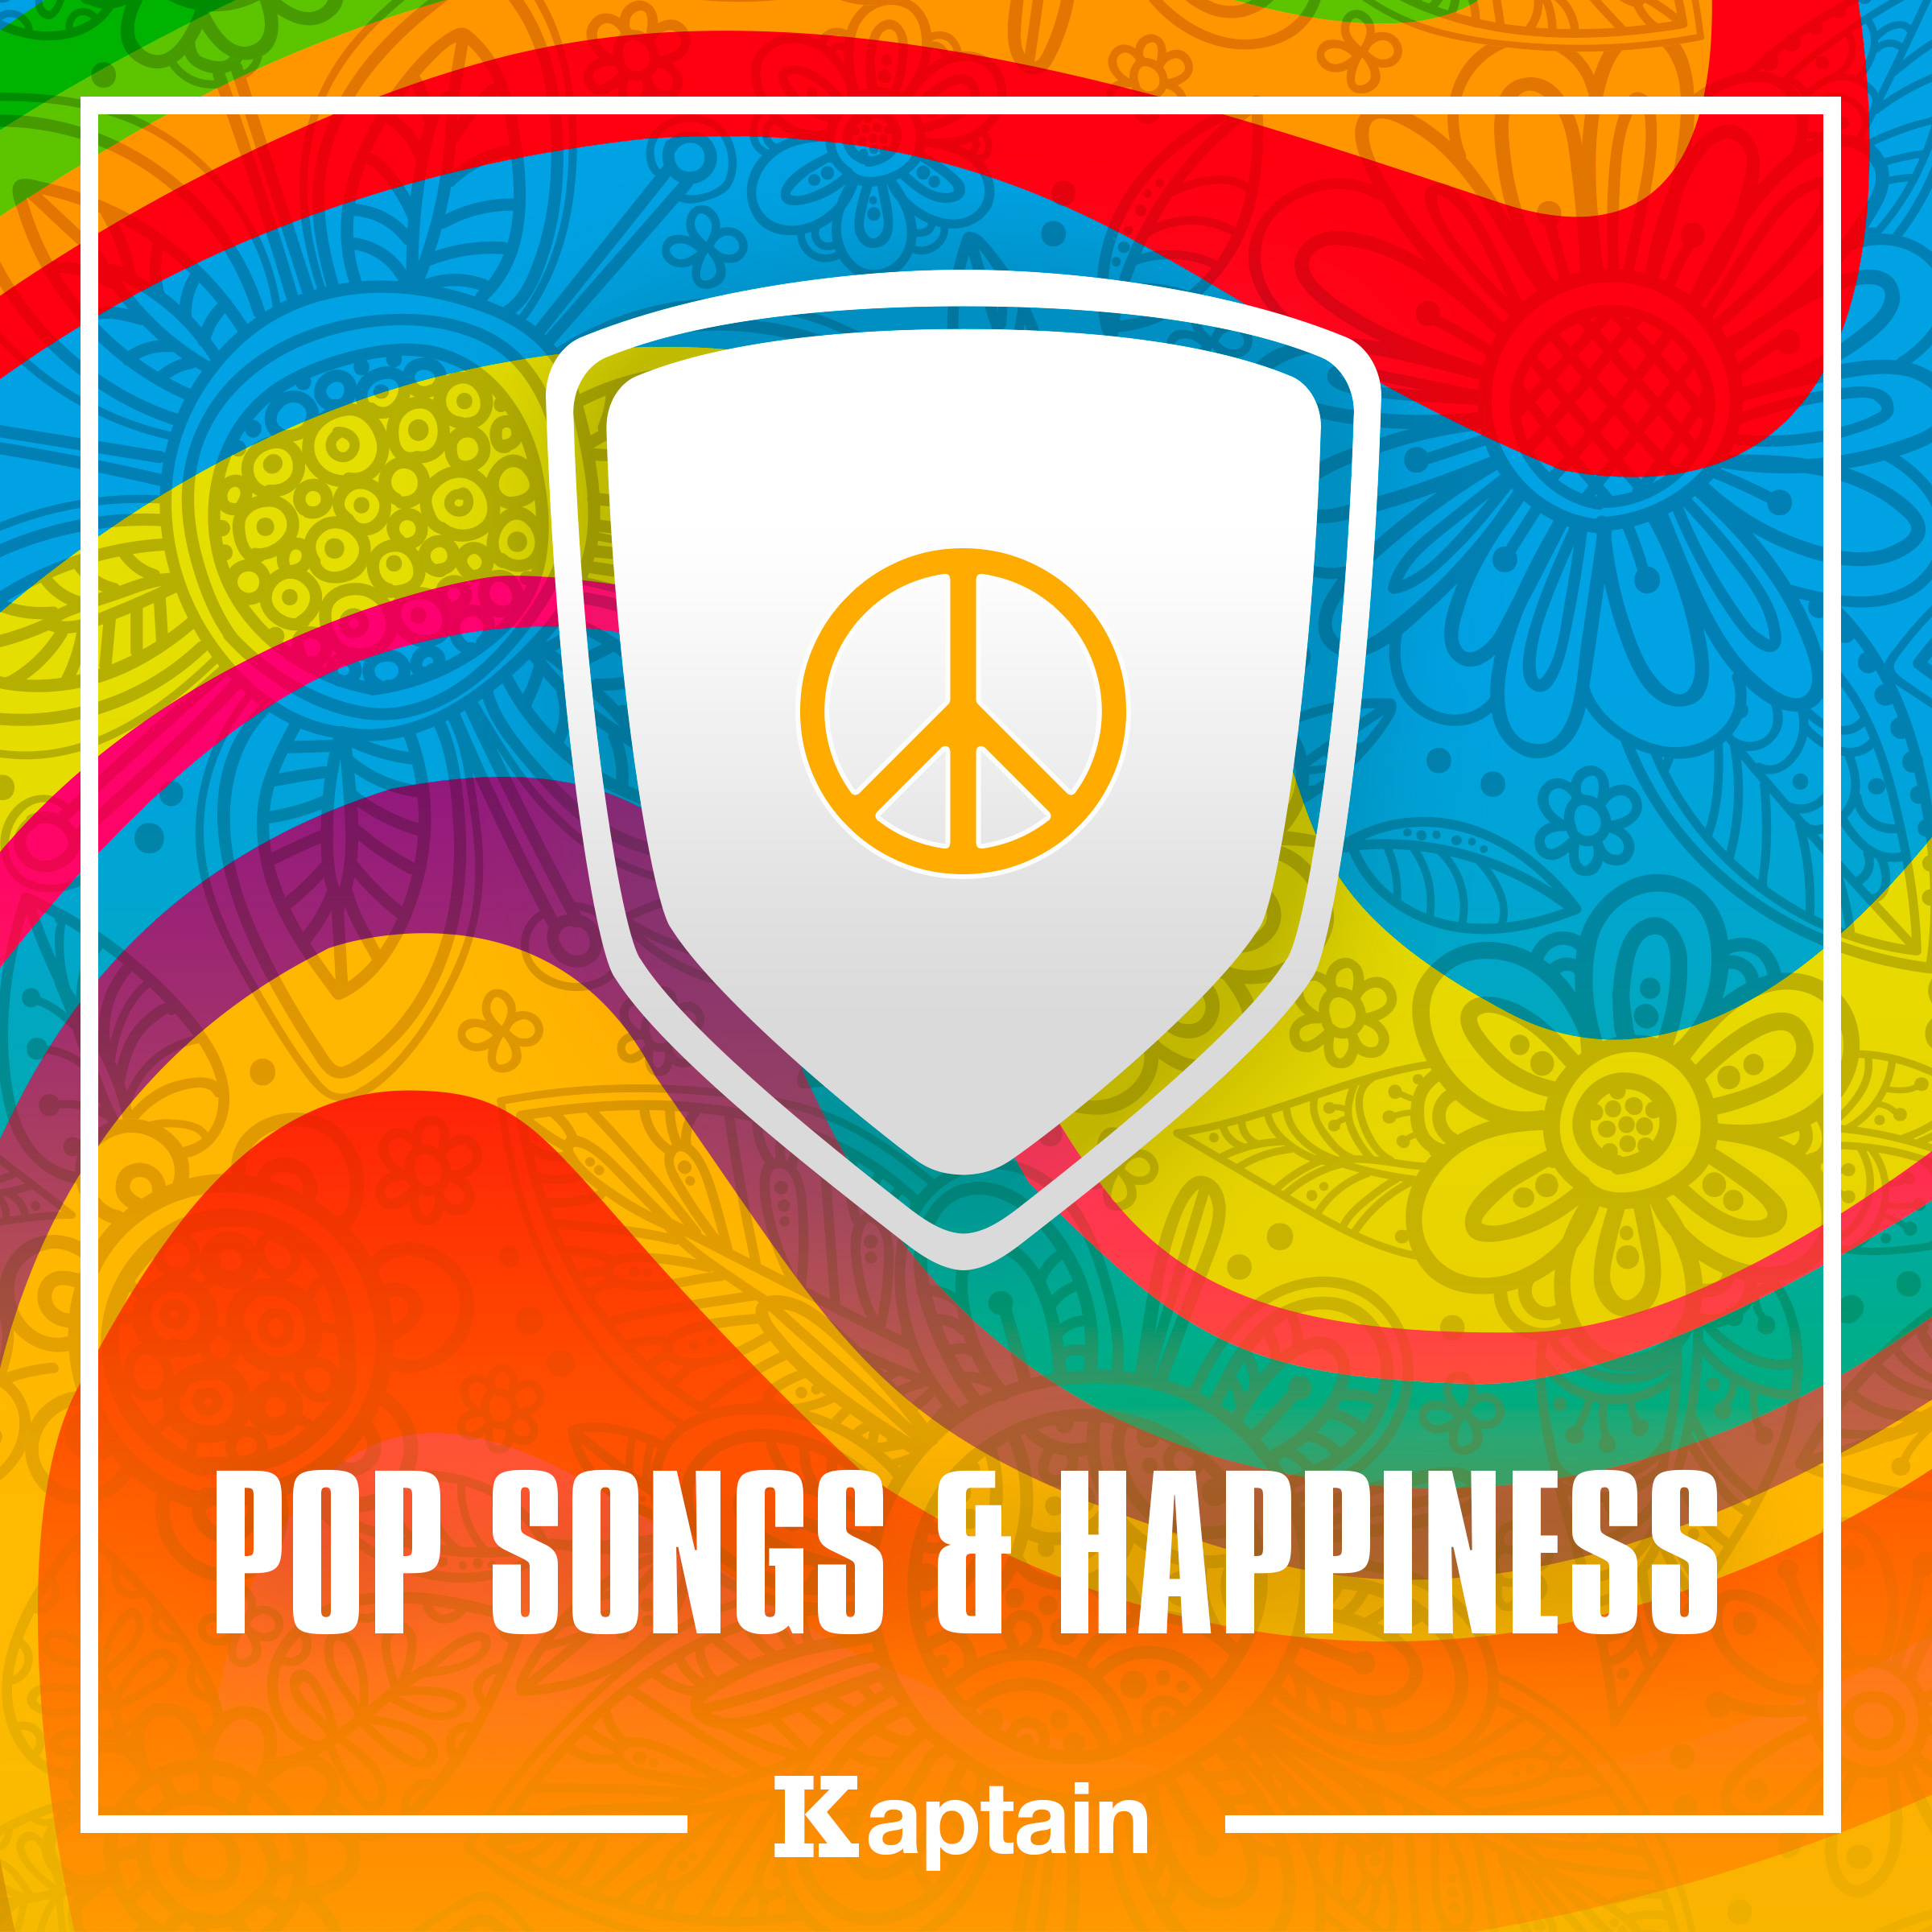 Pop Songs & Happiness